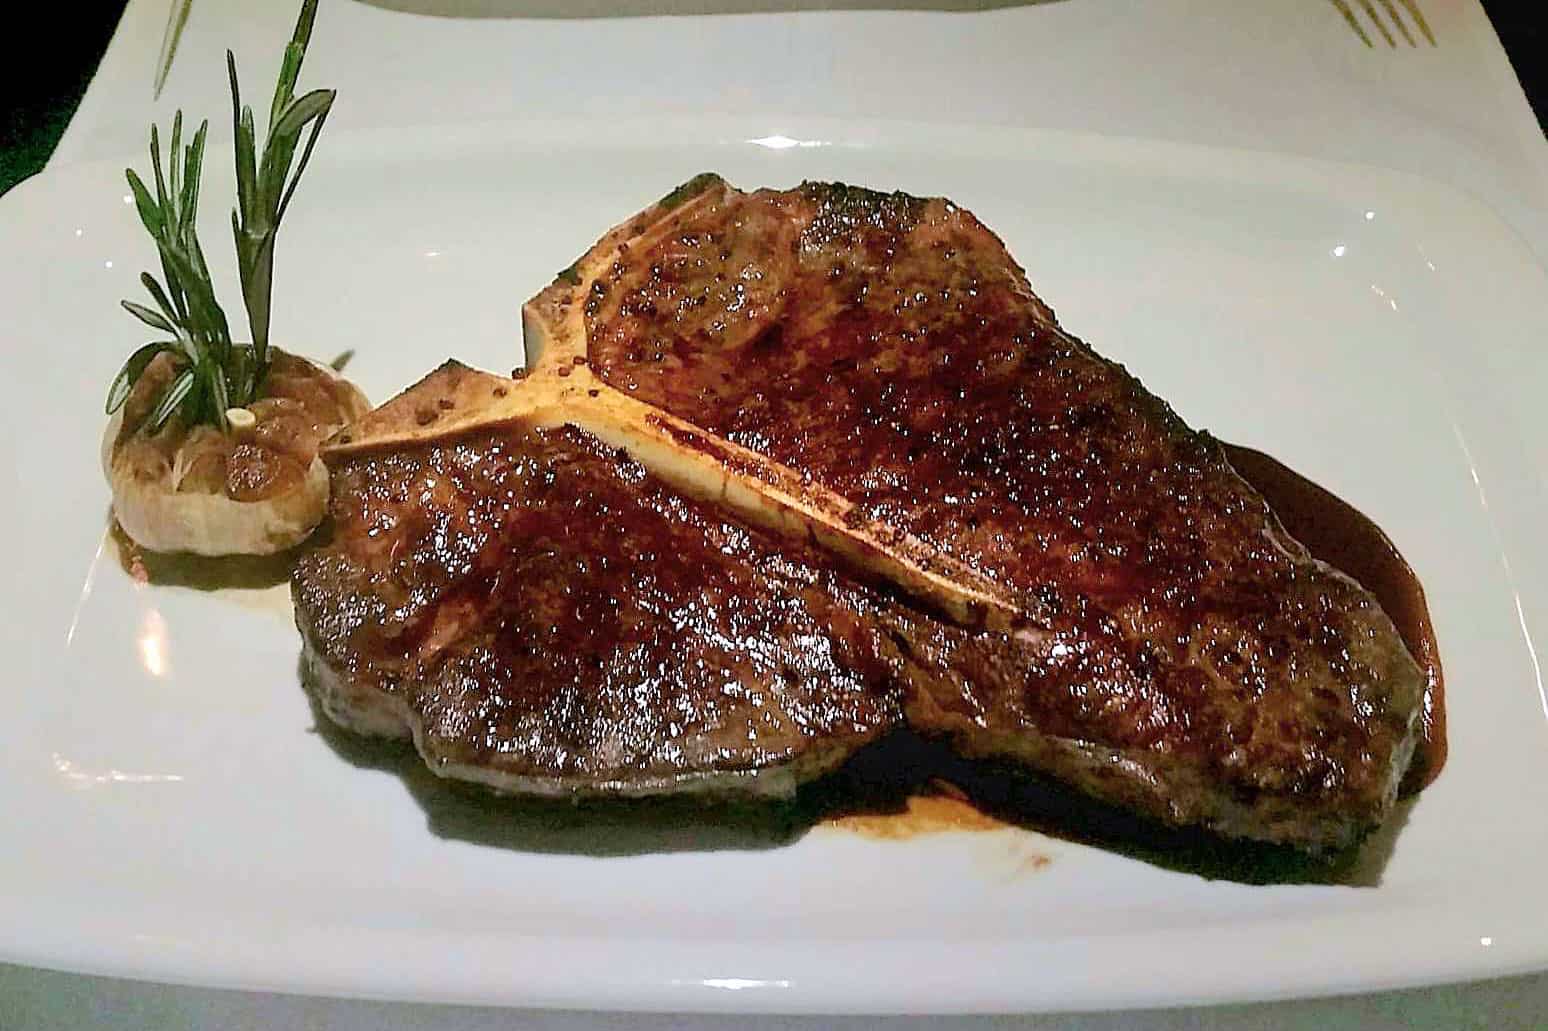 CLOSURE: One of the best steakhouses in Canada closes permanently in Mississauga, Ontario | insauga